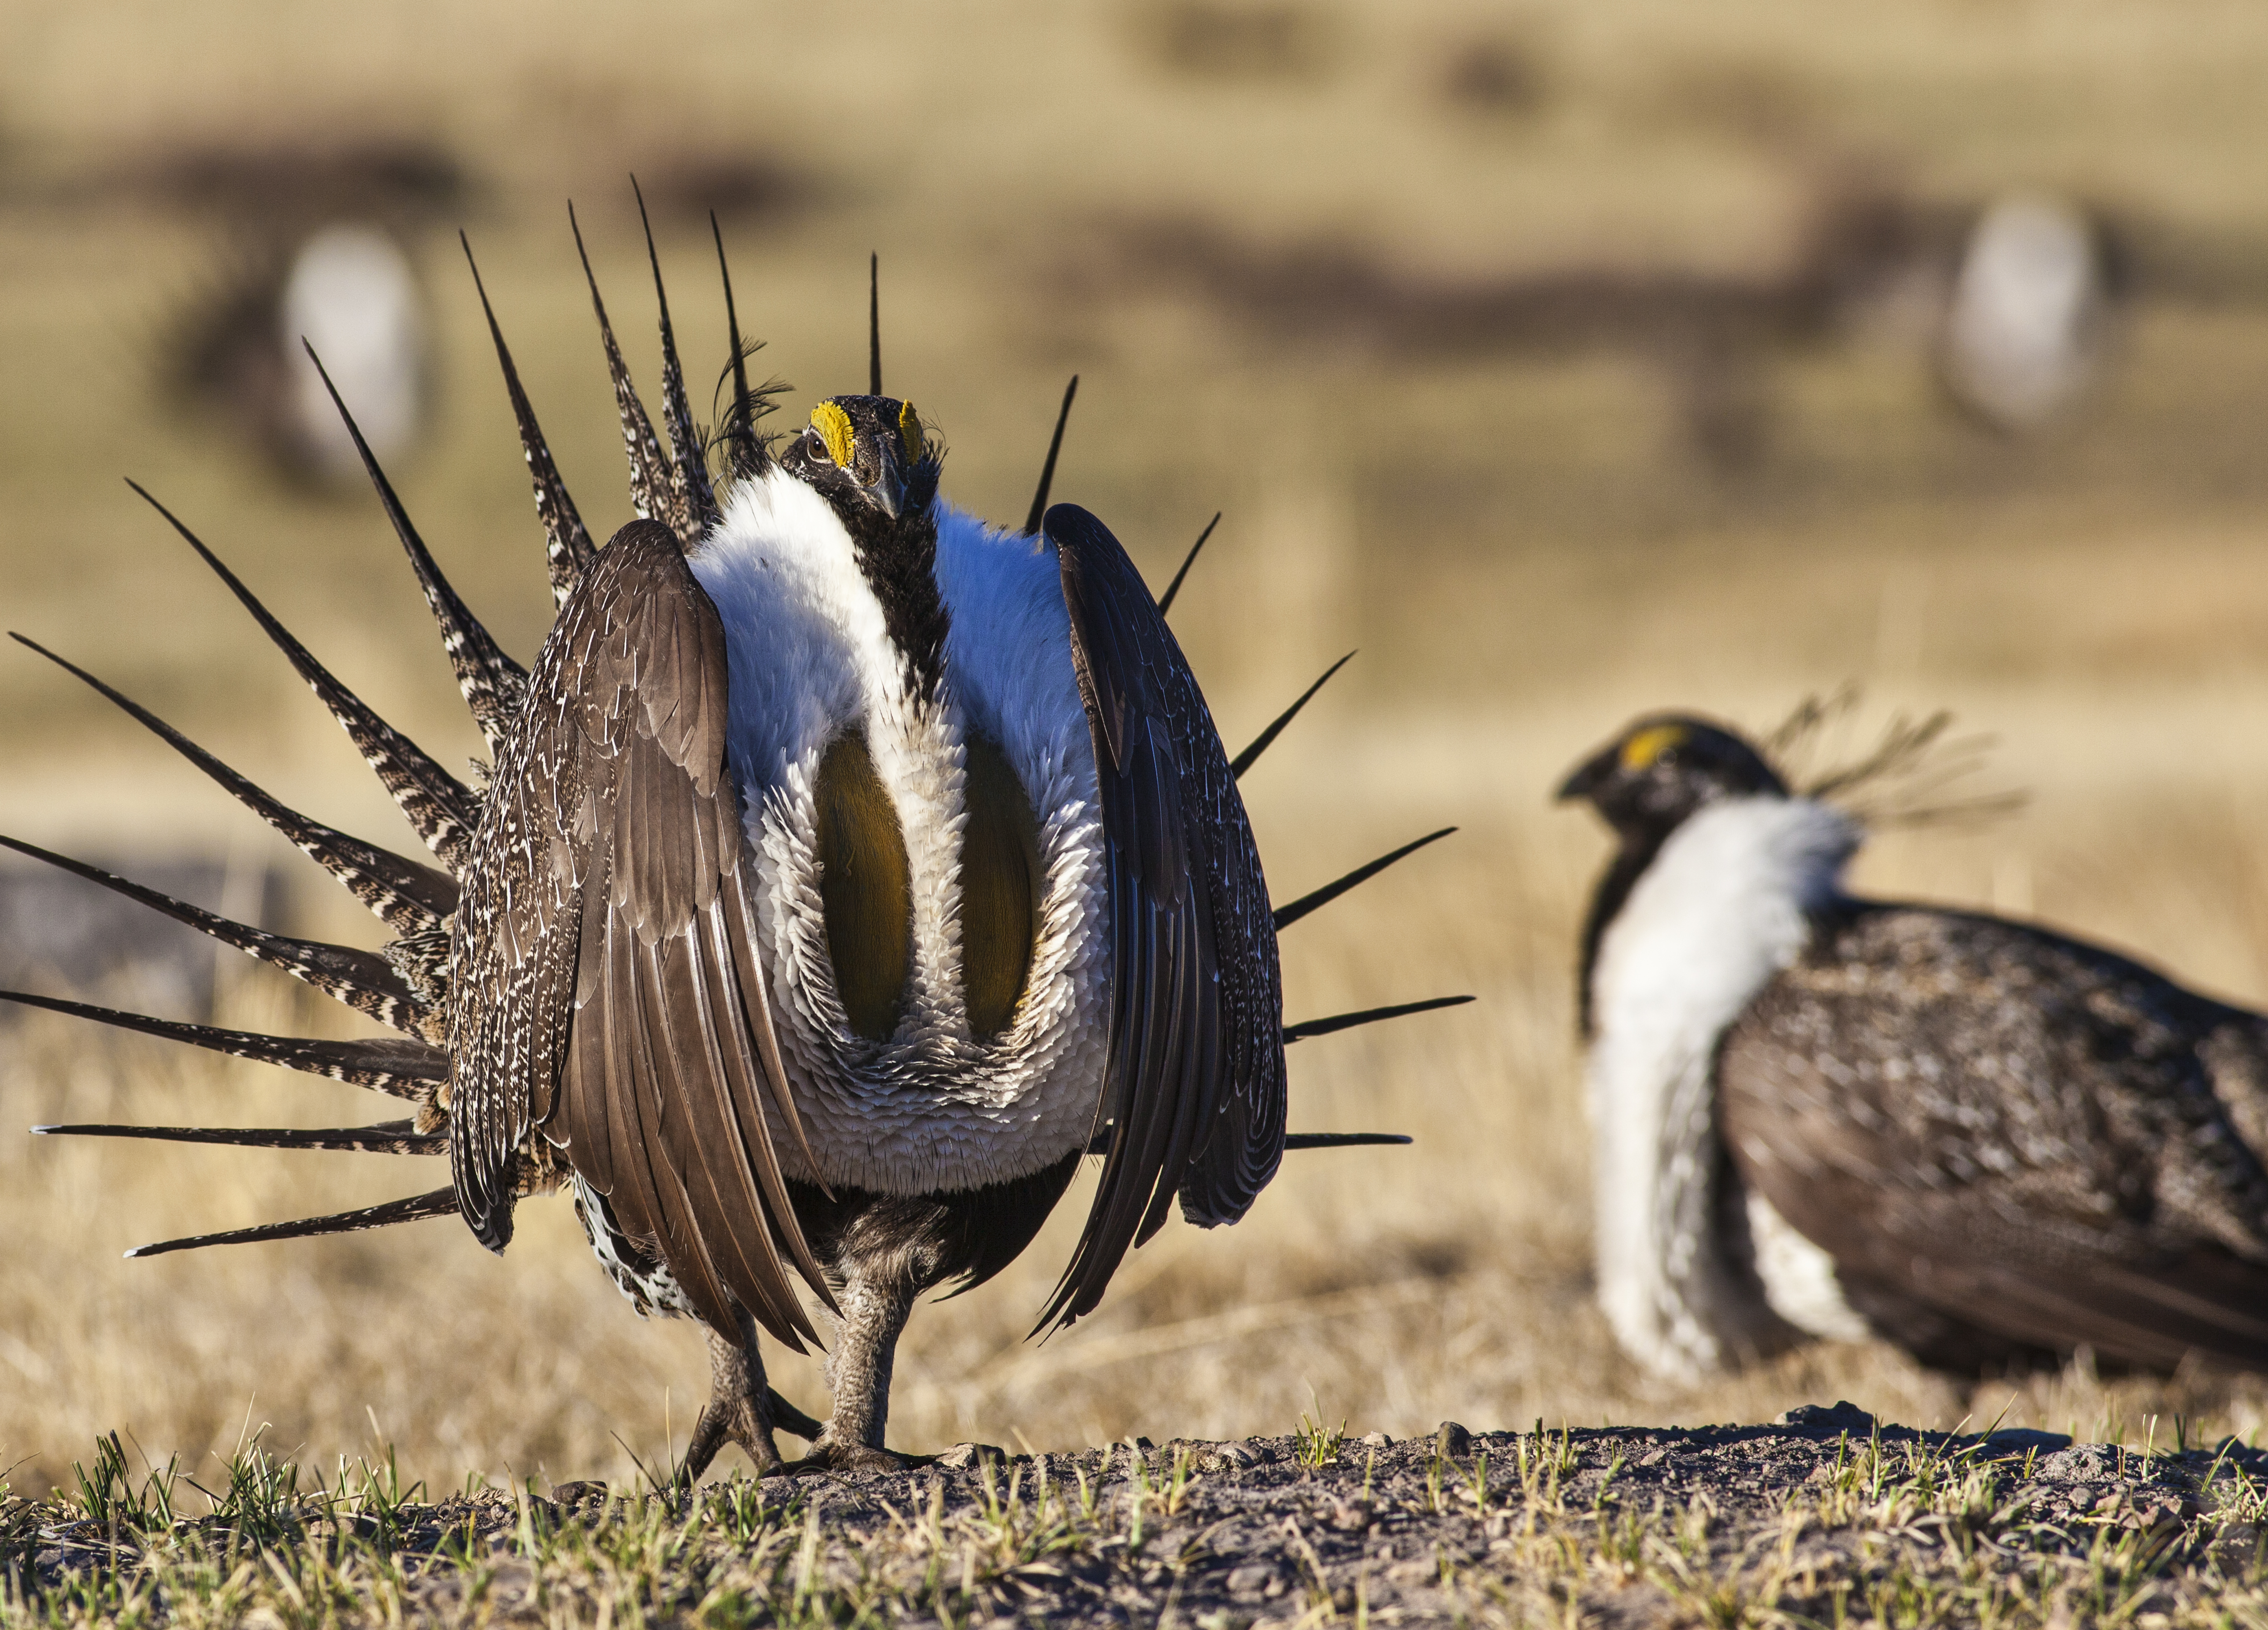 Joint statement from the U.S. Cattlemen’s Association and National Farmers Union regarding Sage Grouse Plans